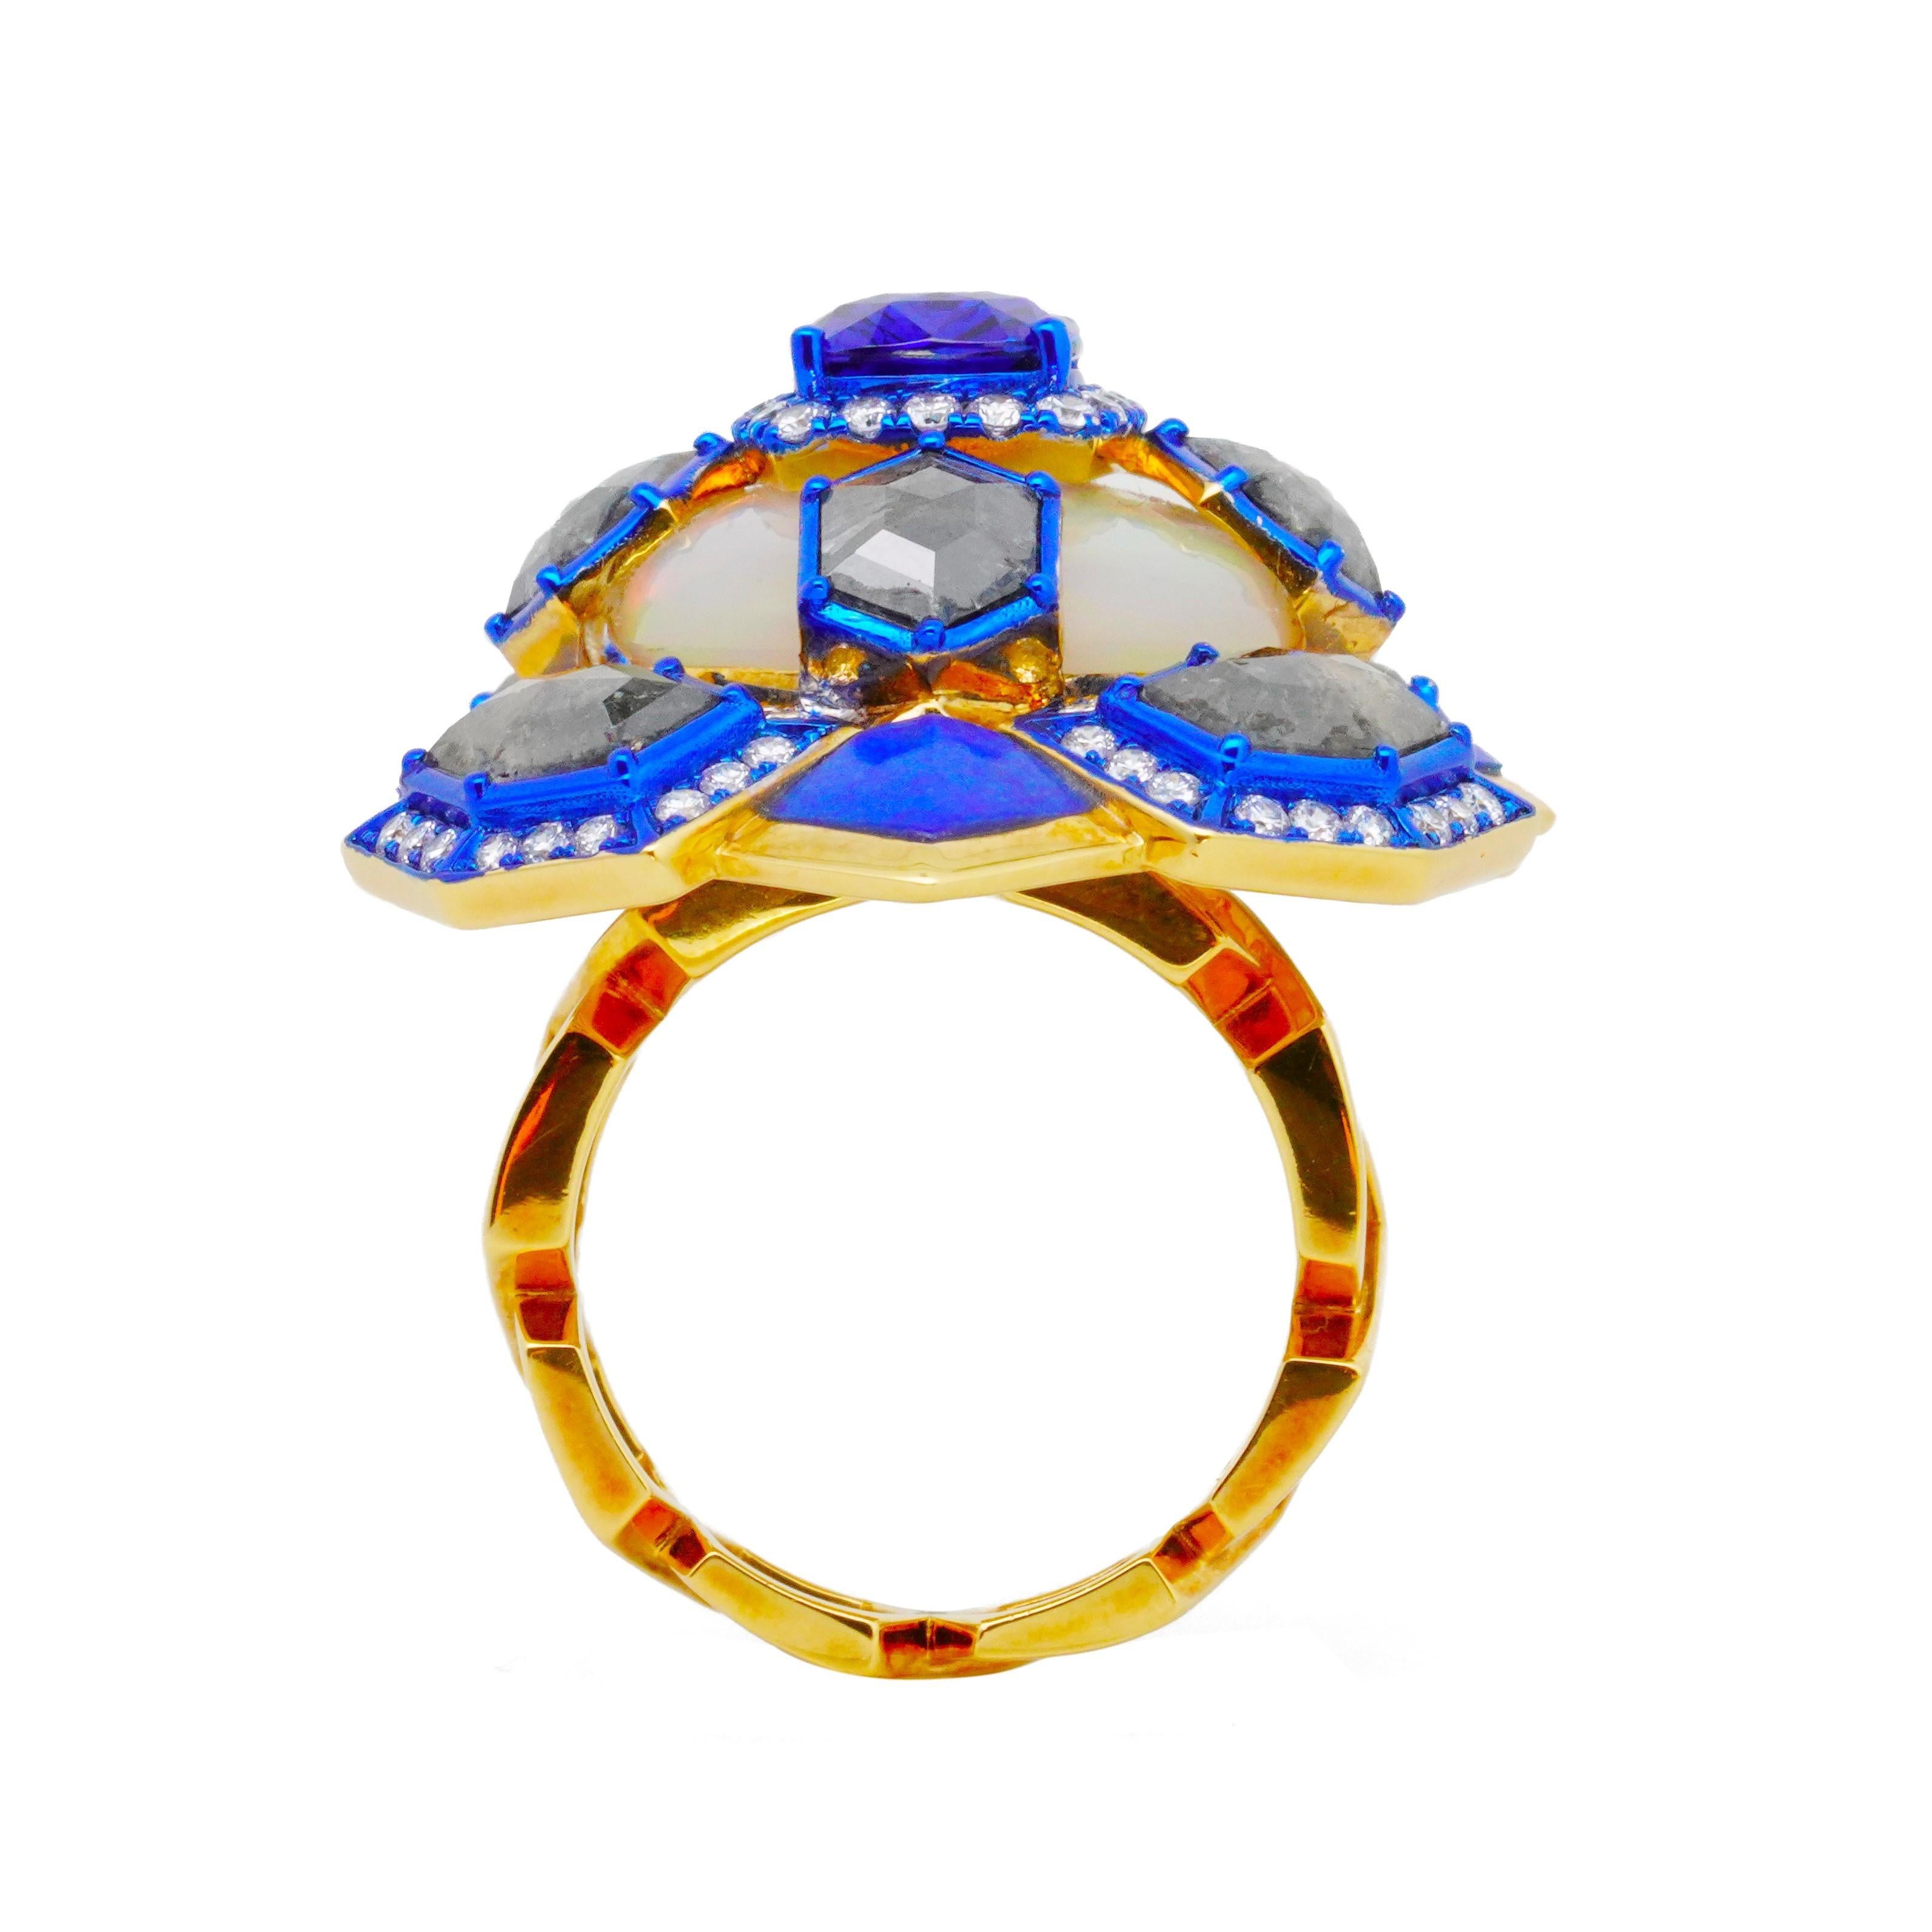 The Blue-Awakening Ring from The Psychedelic Light Collection by Austy Lee features a 2.24-carat Sri Lankan Royal-Blue Sapphhire, which is set on top of a 8.75-carat Euthopian Opal. The ring is decorated with flat-cut raw diamonds, lapis lazuli and